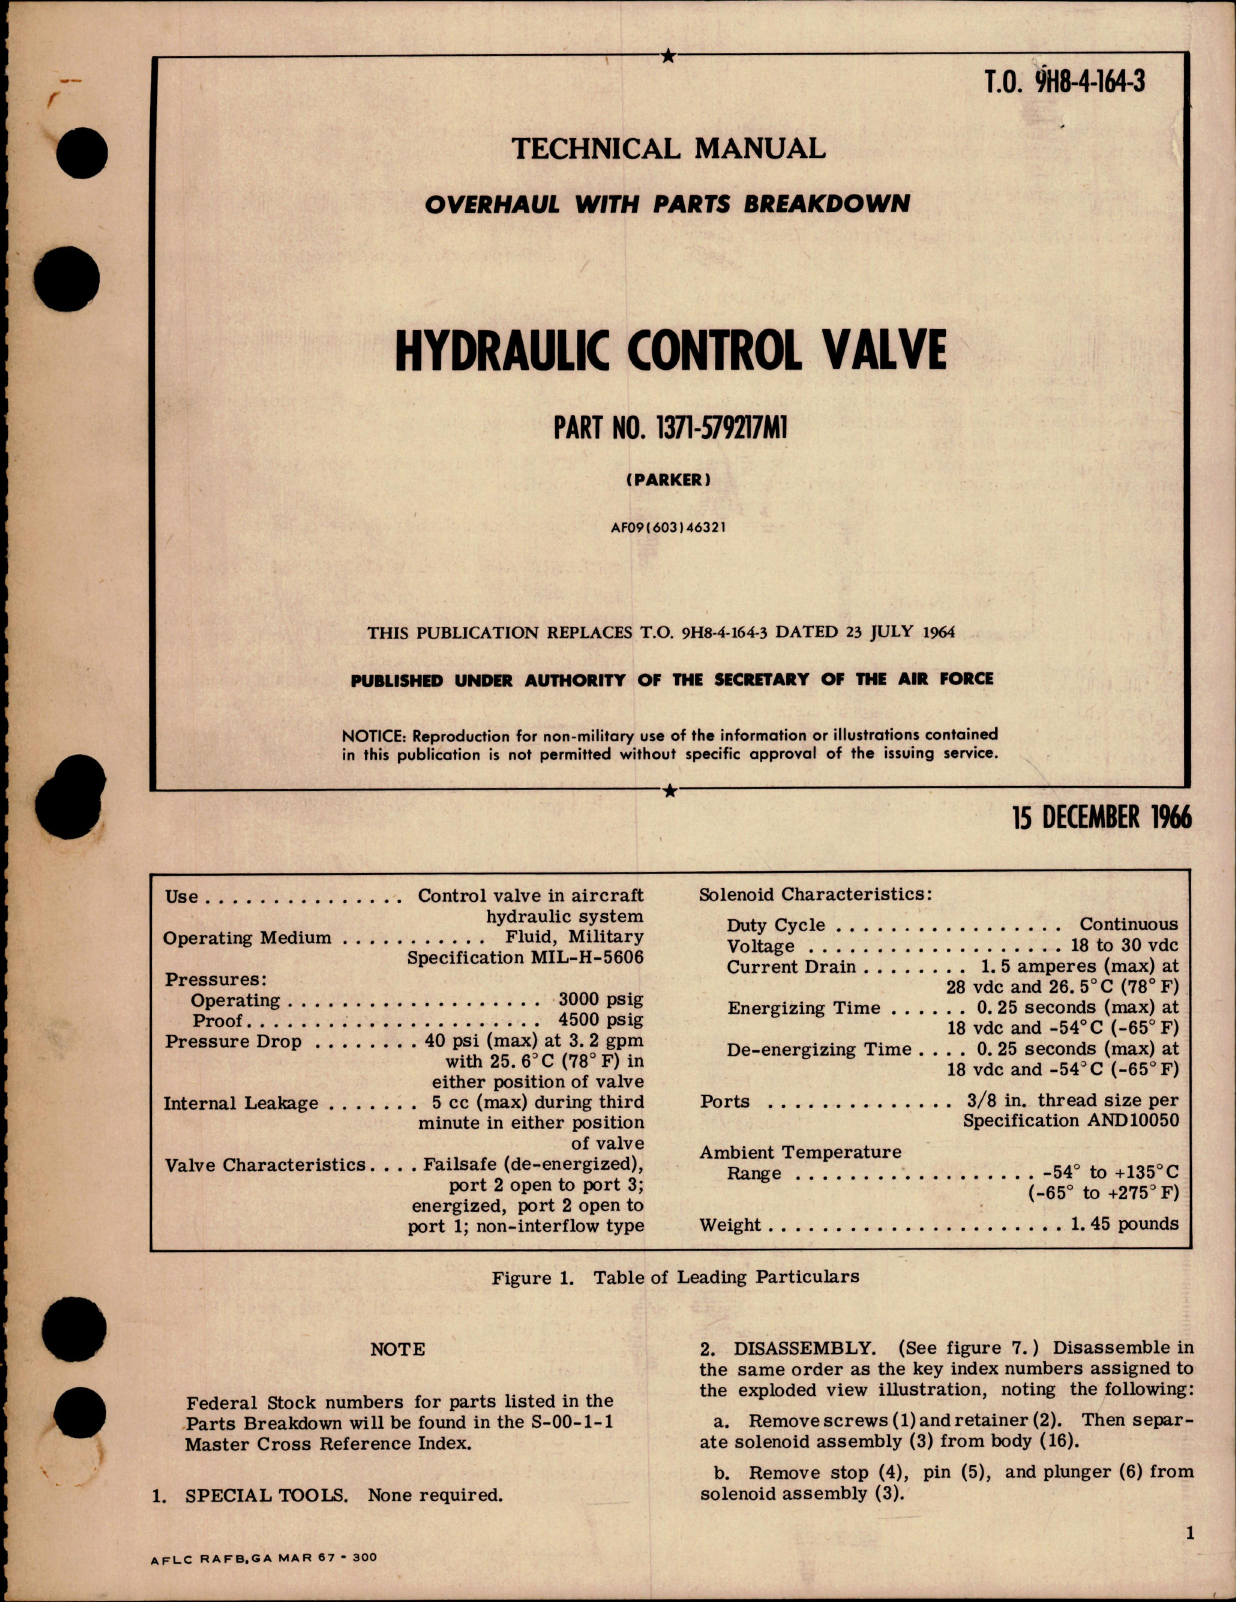 Sample page 1 from AirCorps Library document: Overhaul with Parts Breakdown for Hydraulic Control Valve - Part 1371-579217M1 